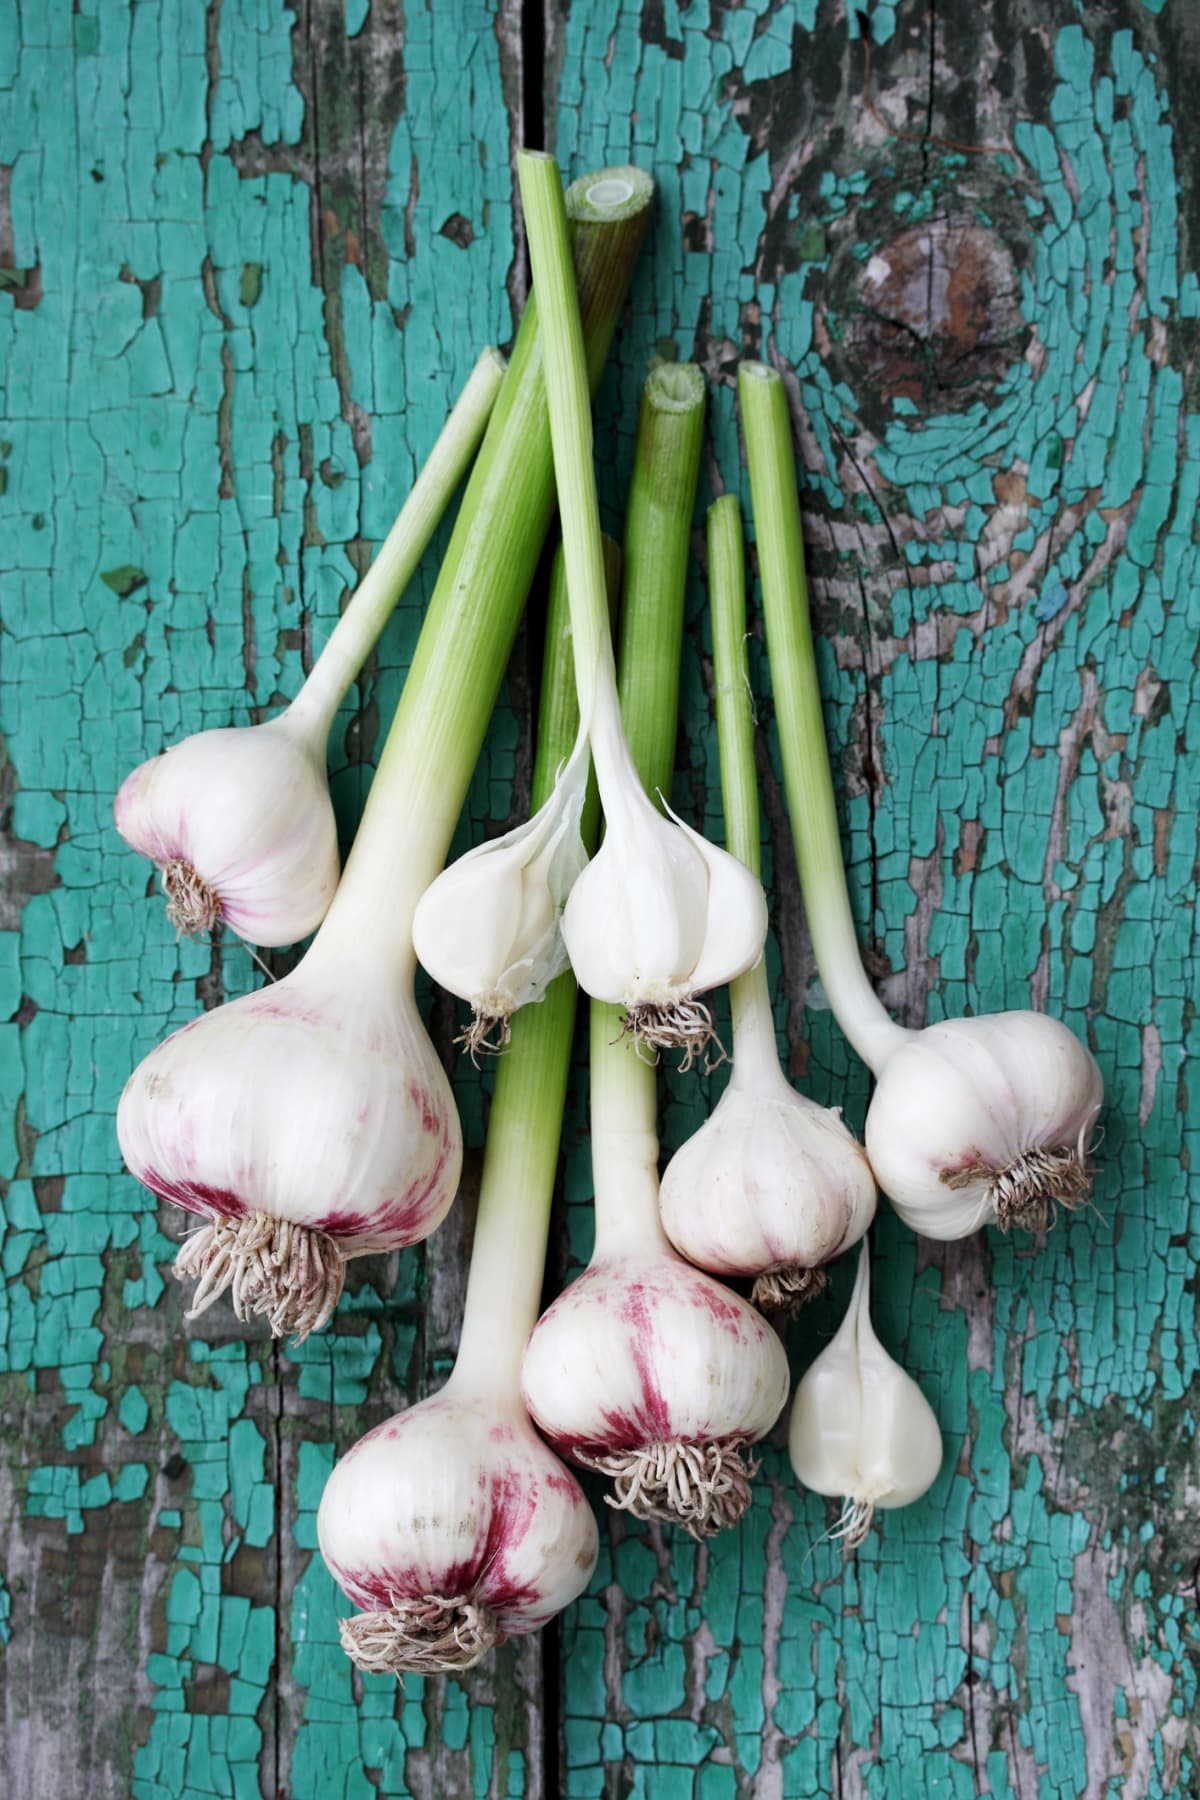 Fresh garlic on a wooden board painted